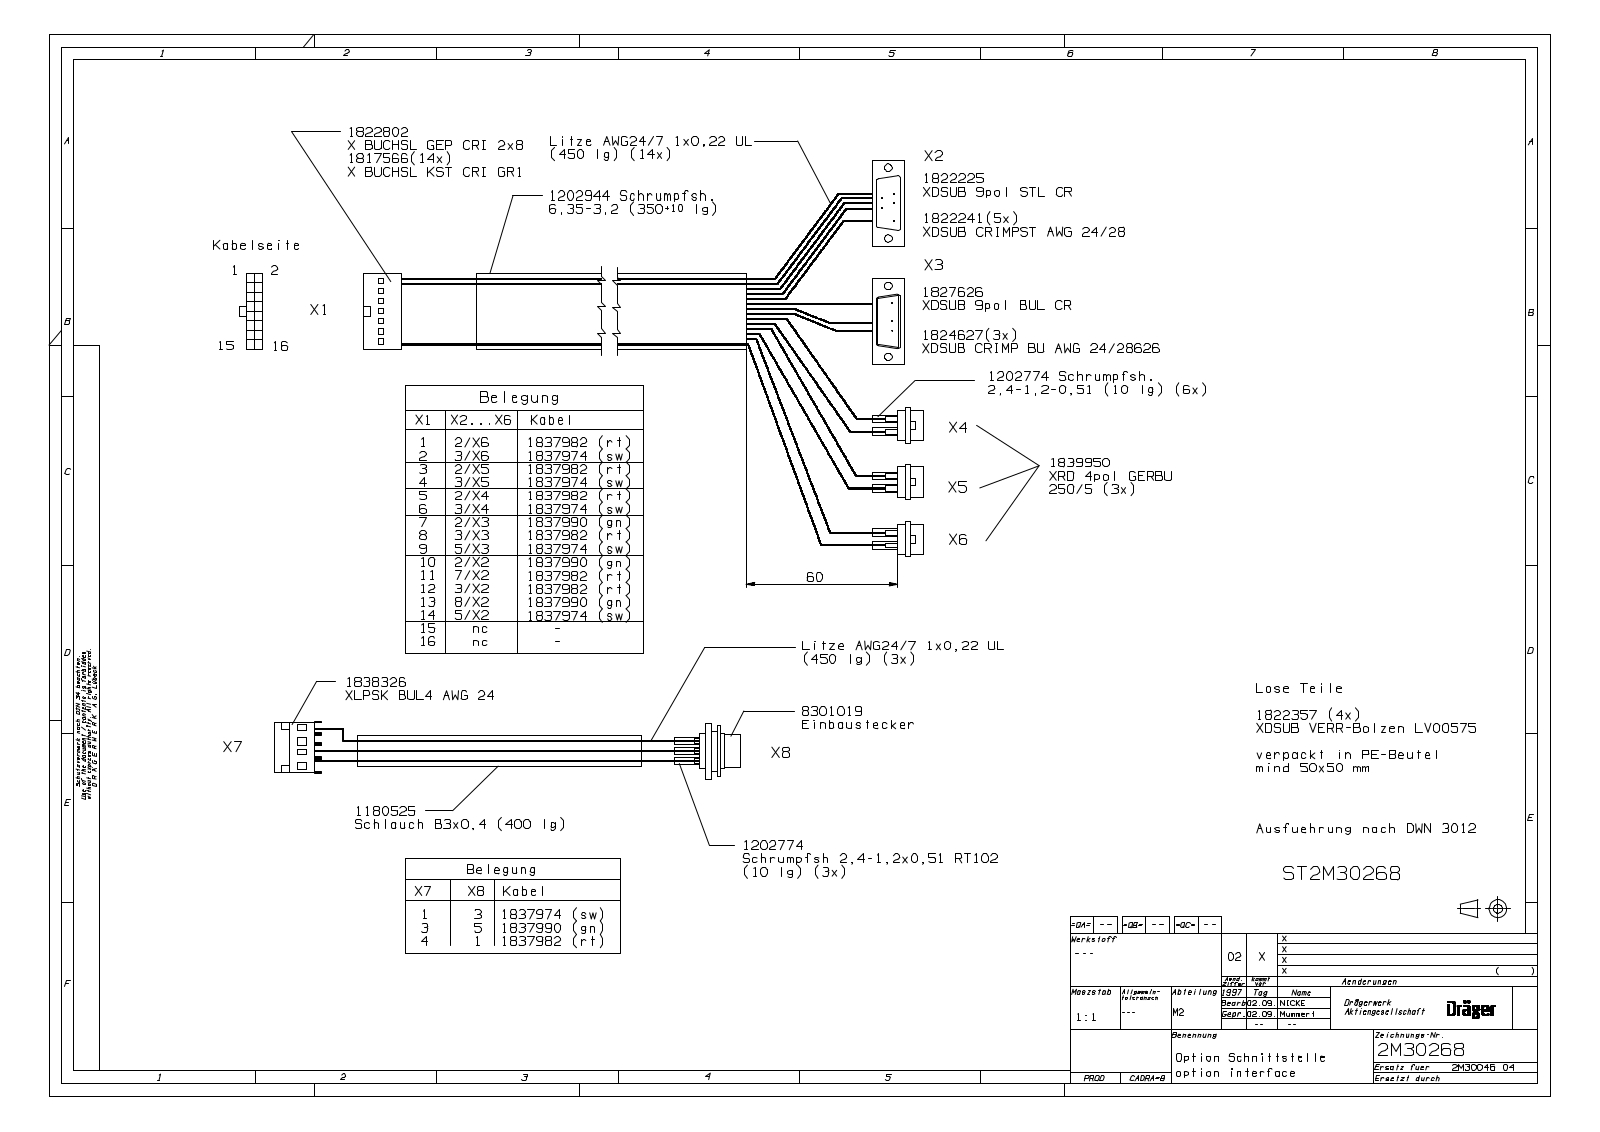 Drager Babytherm 8004, Babytherm 8010 Schematic Diagrams